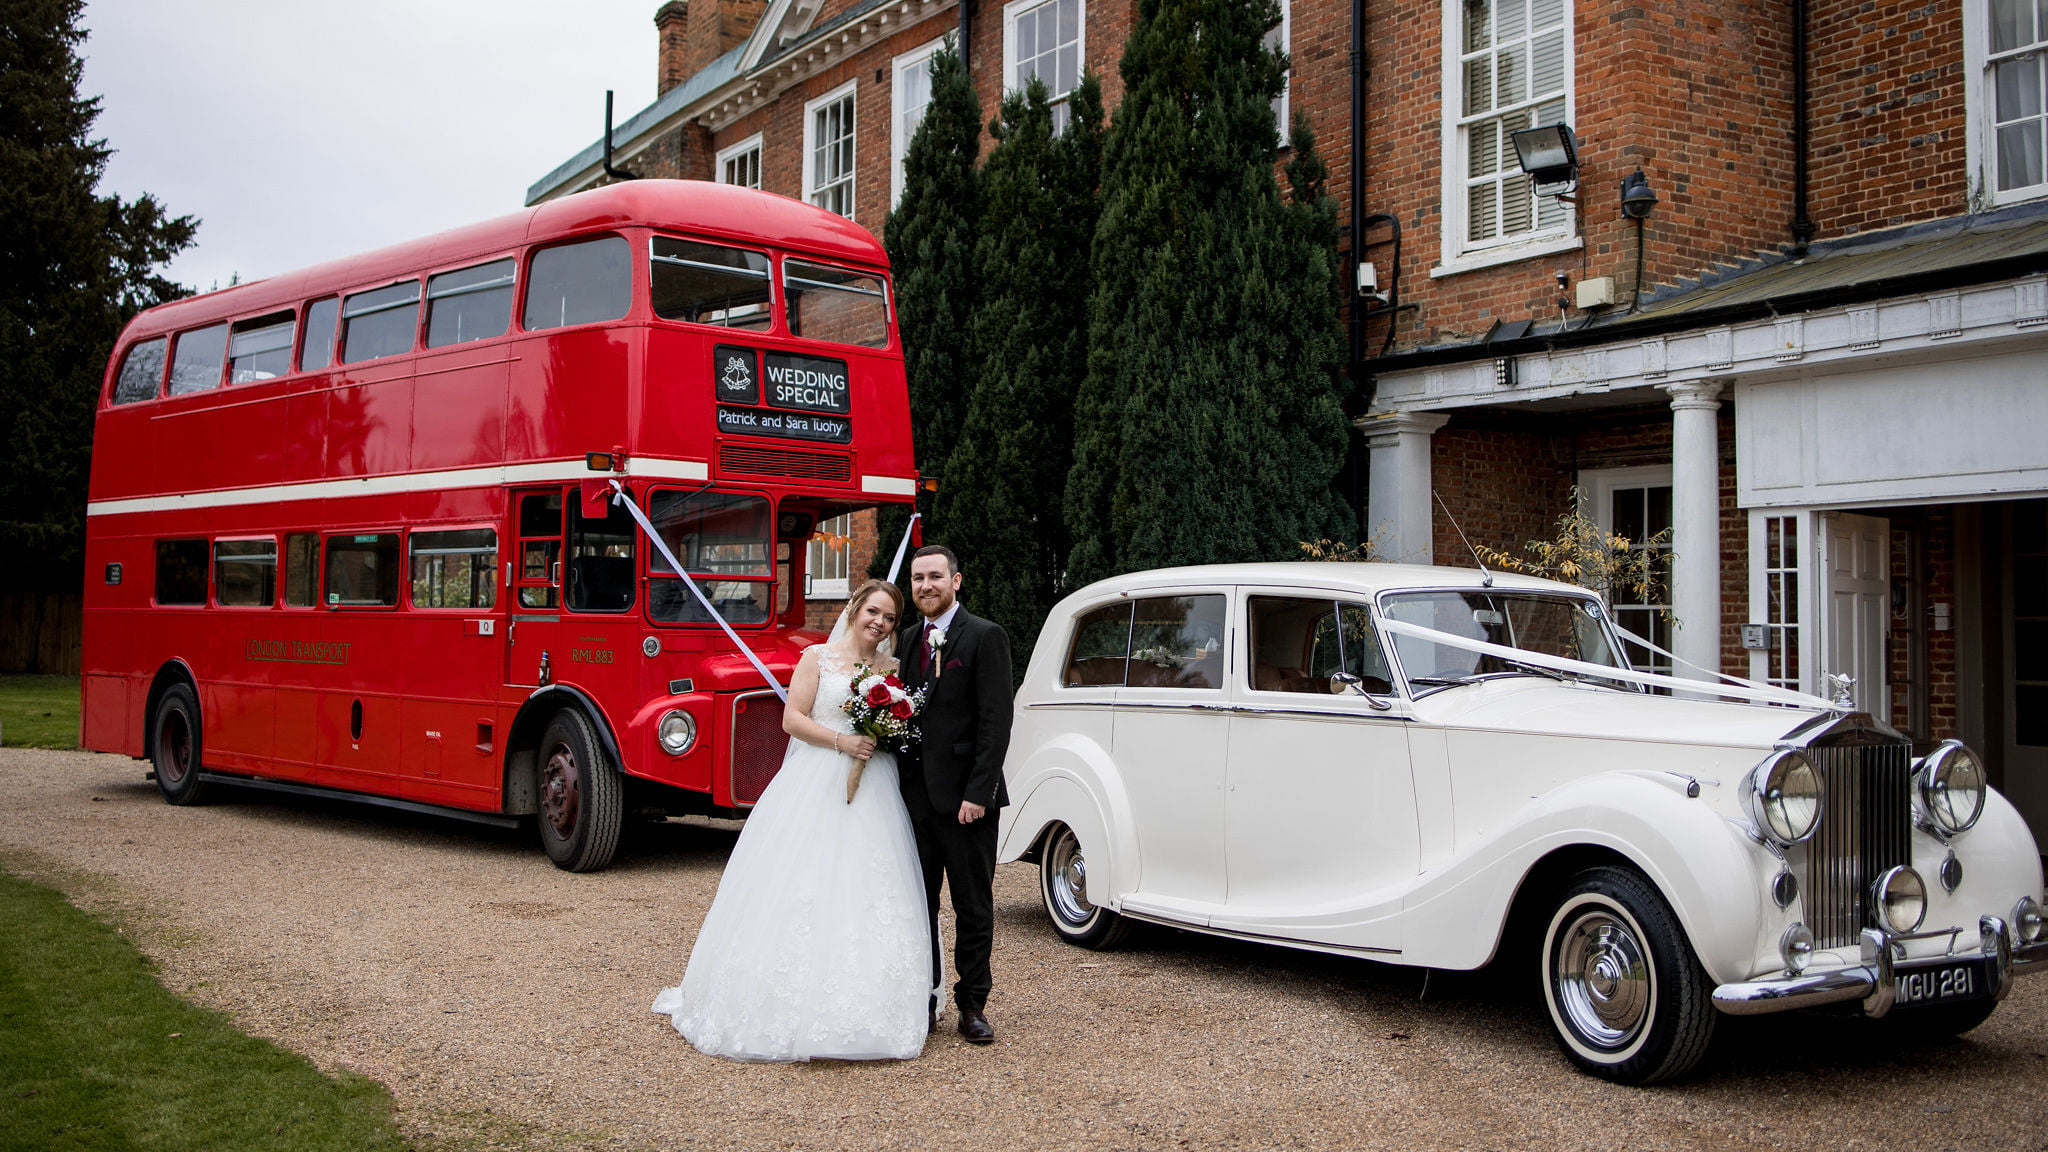 Classic rolls-Royce followed by a Red Double Decker Vintage Routemaster bus. Briode and Groom are standing in front of the vehicles